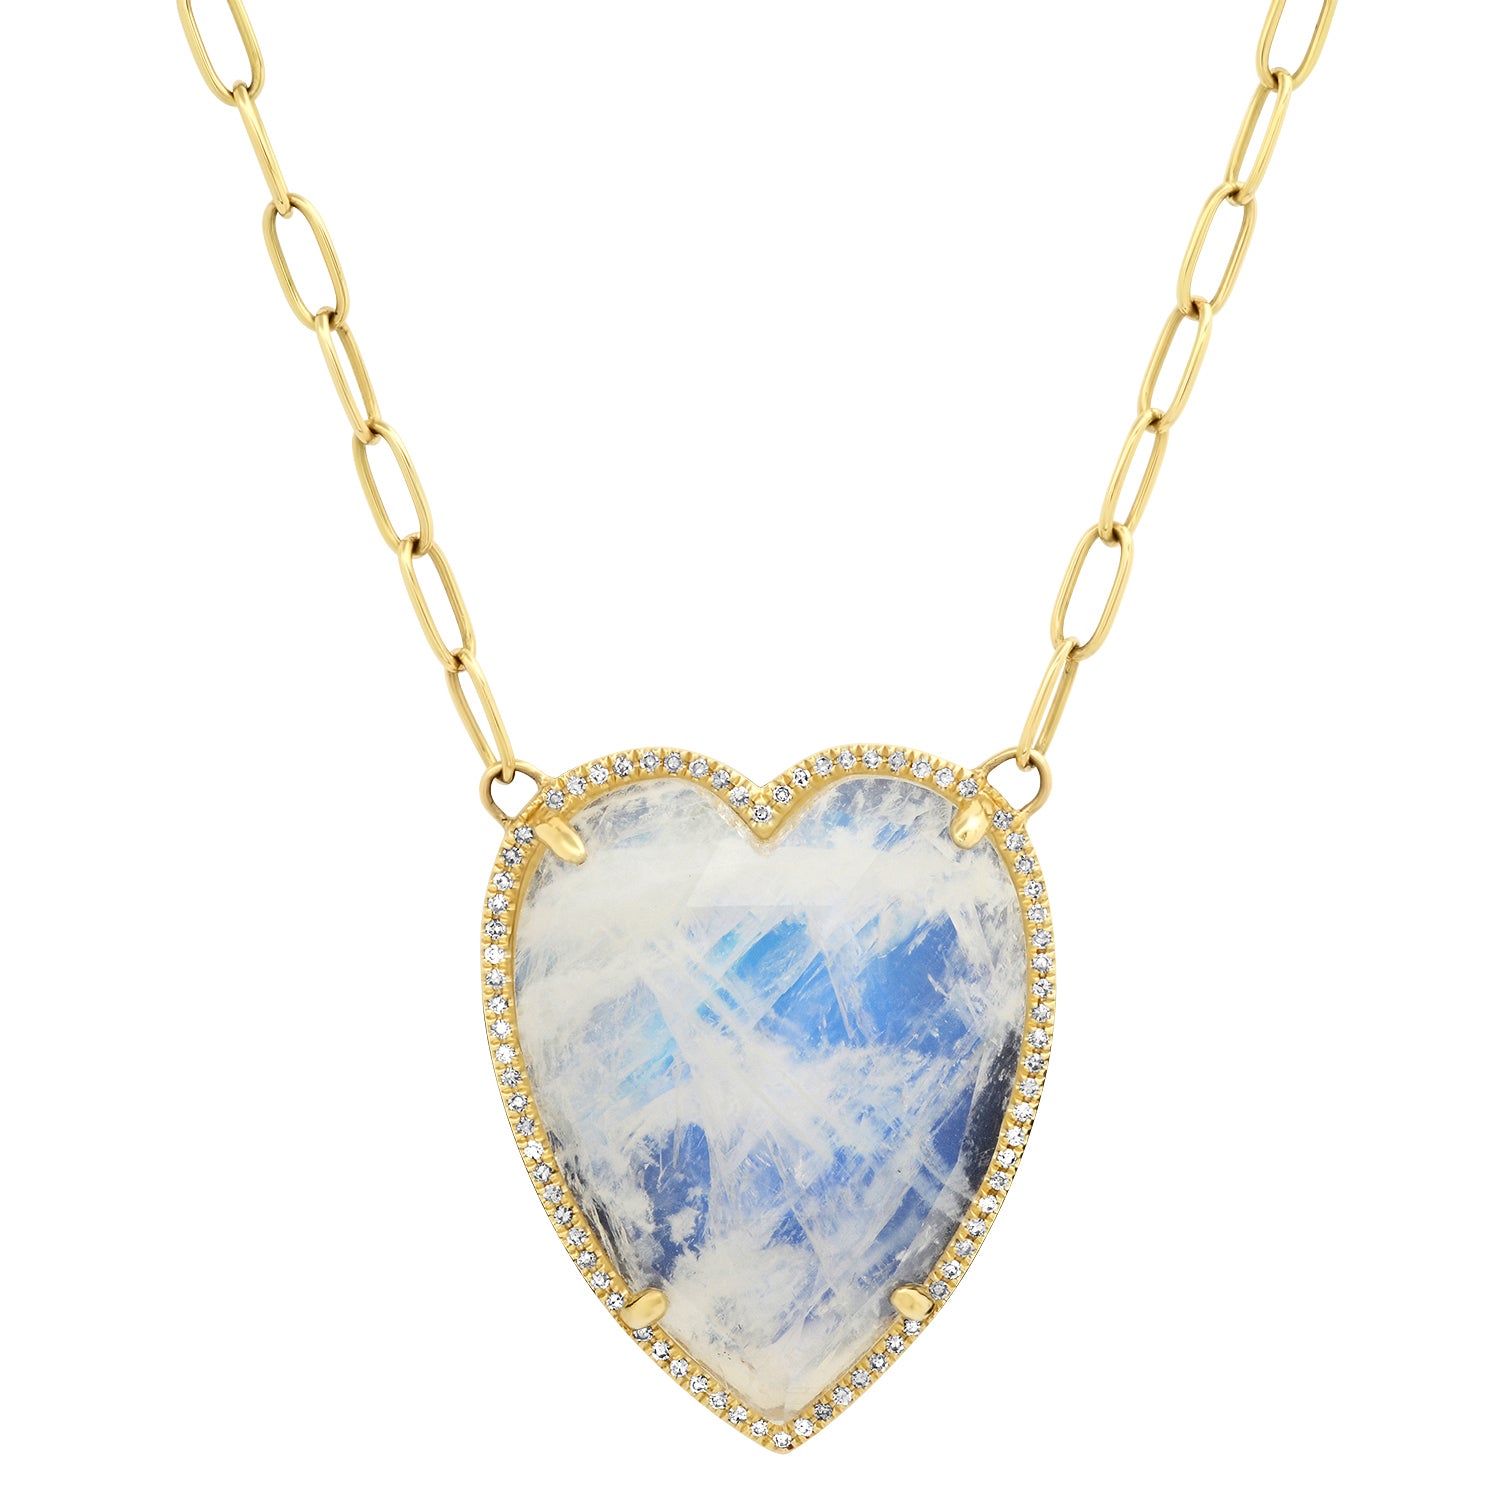 Jumbo Faceted Puffy Gemstone Heart Necklace with Diamond Frame